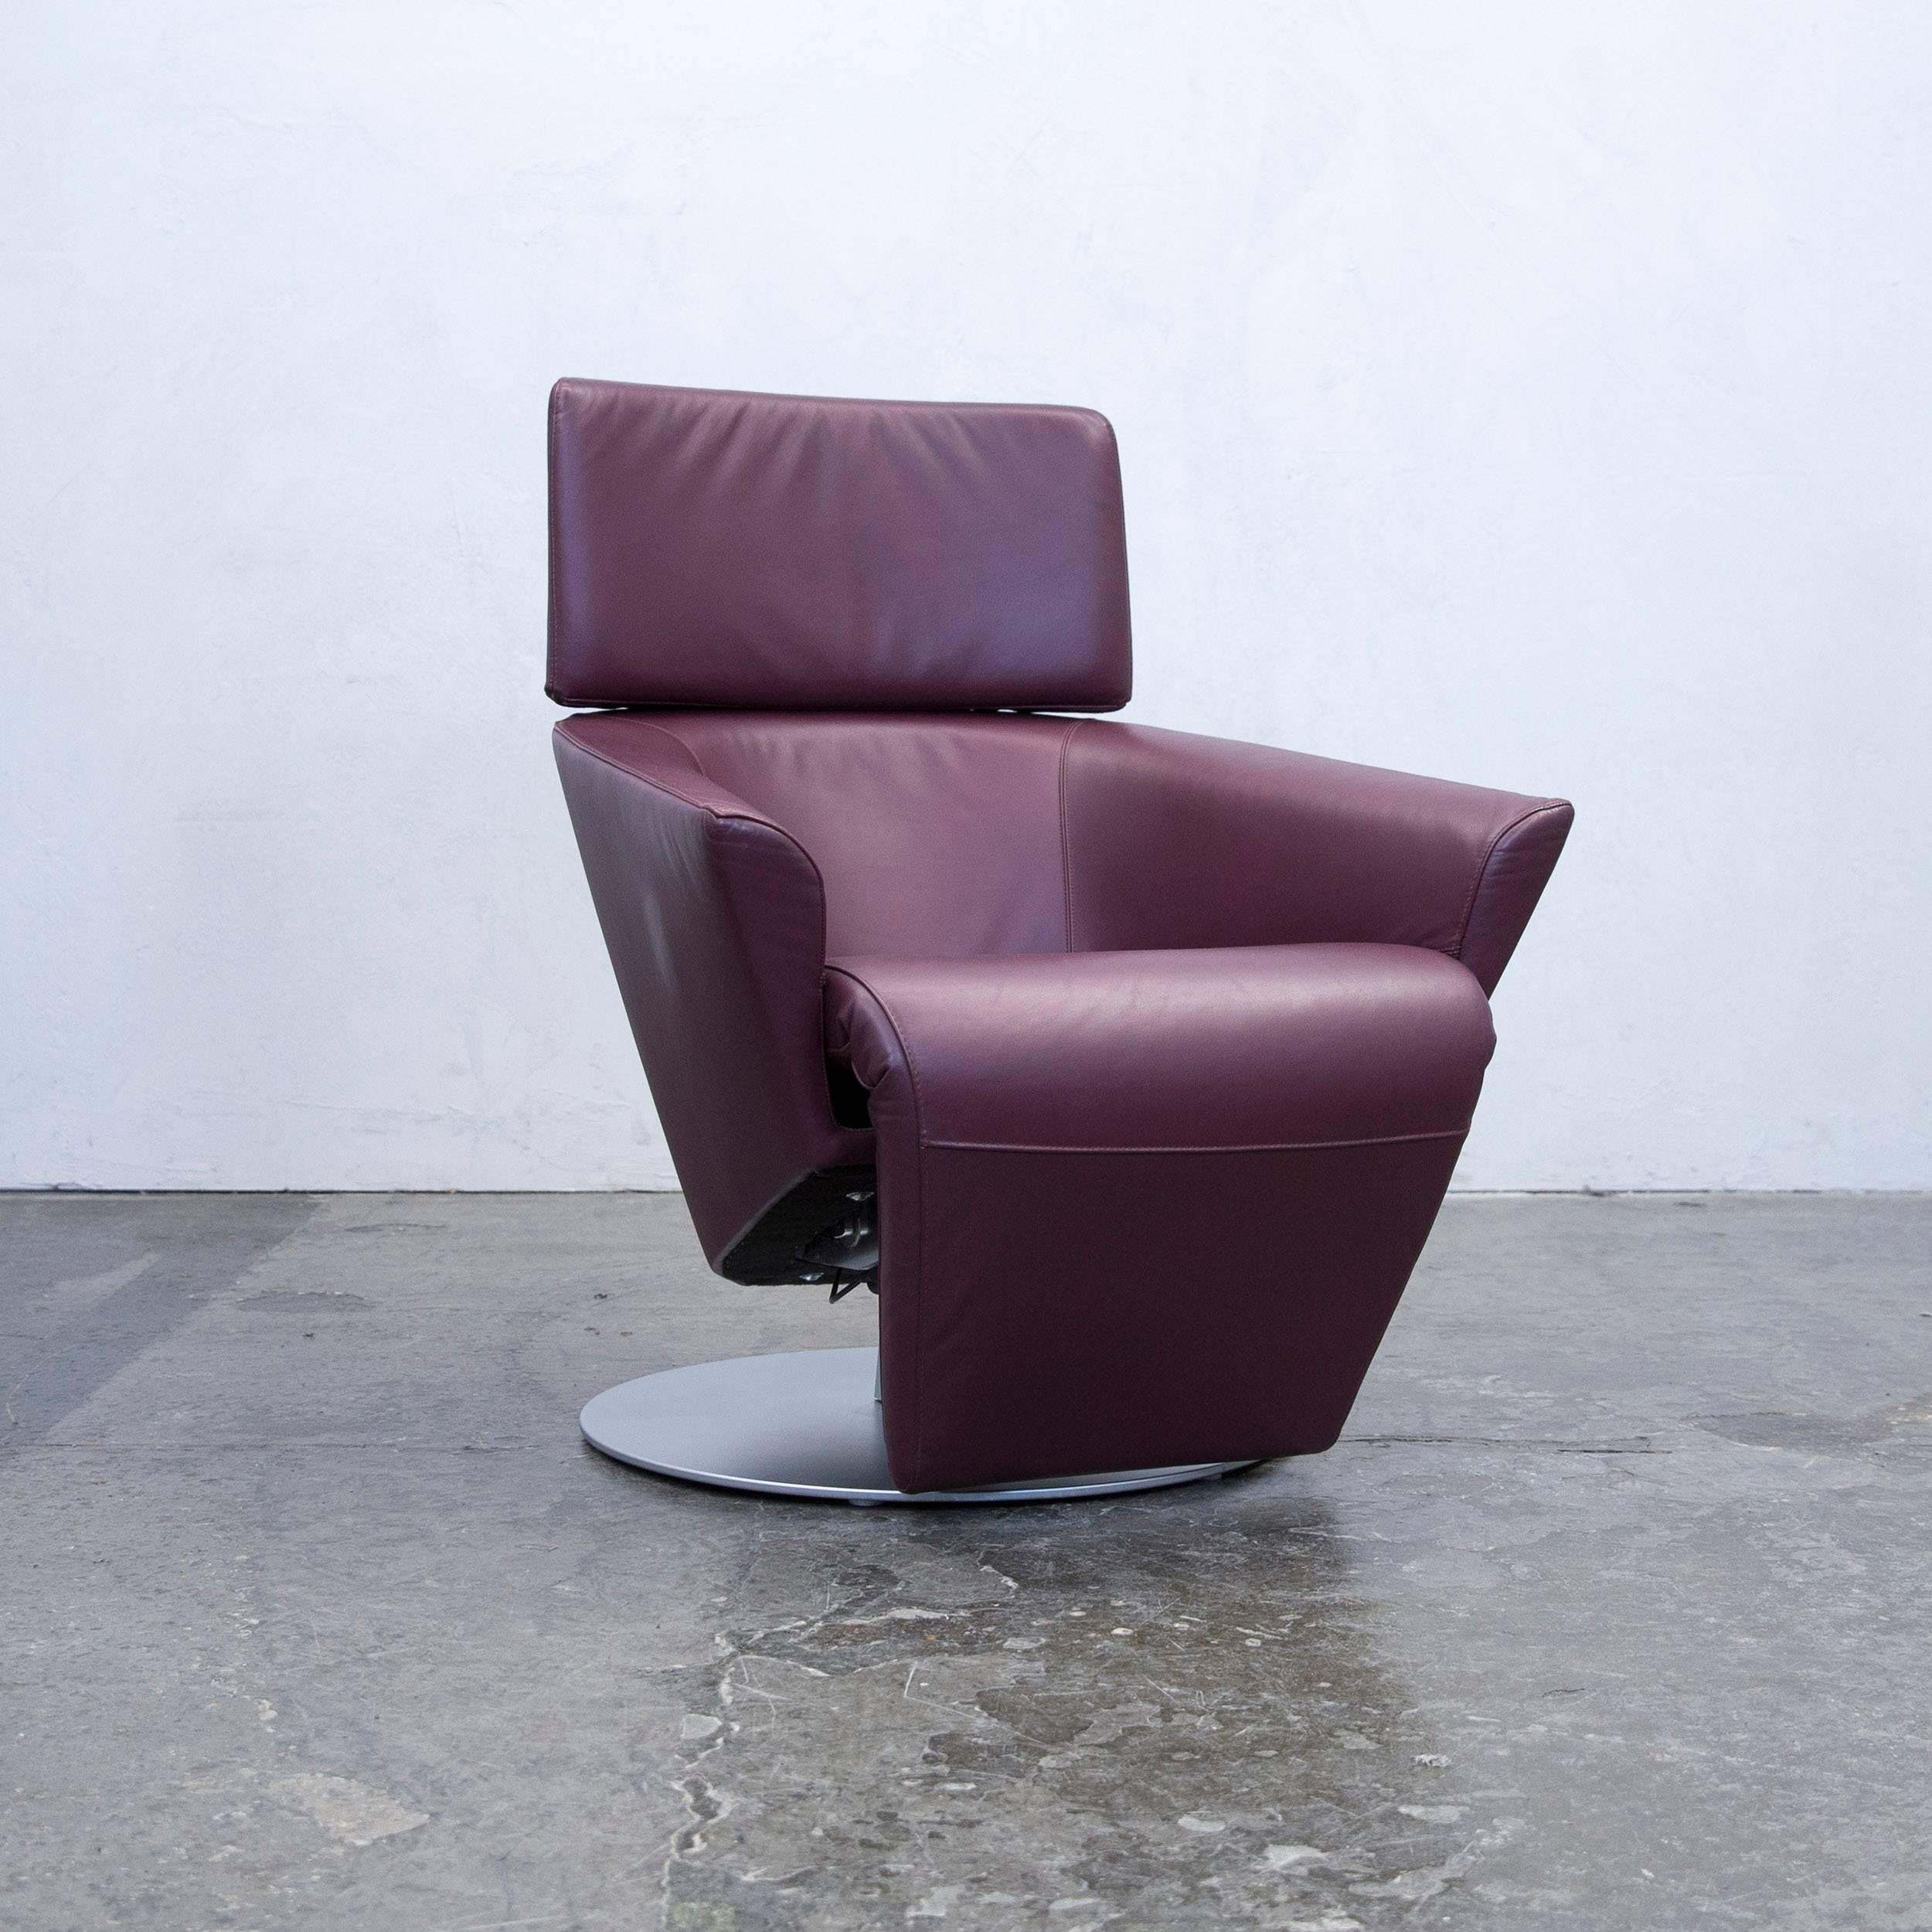 Aubergine colored original WK Wohnen designer leather armchair in a minimalistic and modern design, with a convenient electrical function, made for pure comfort and flexibility.